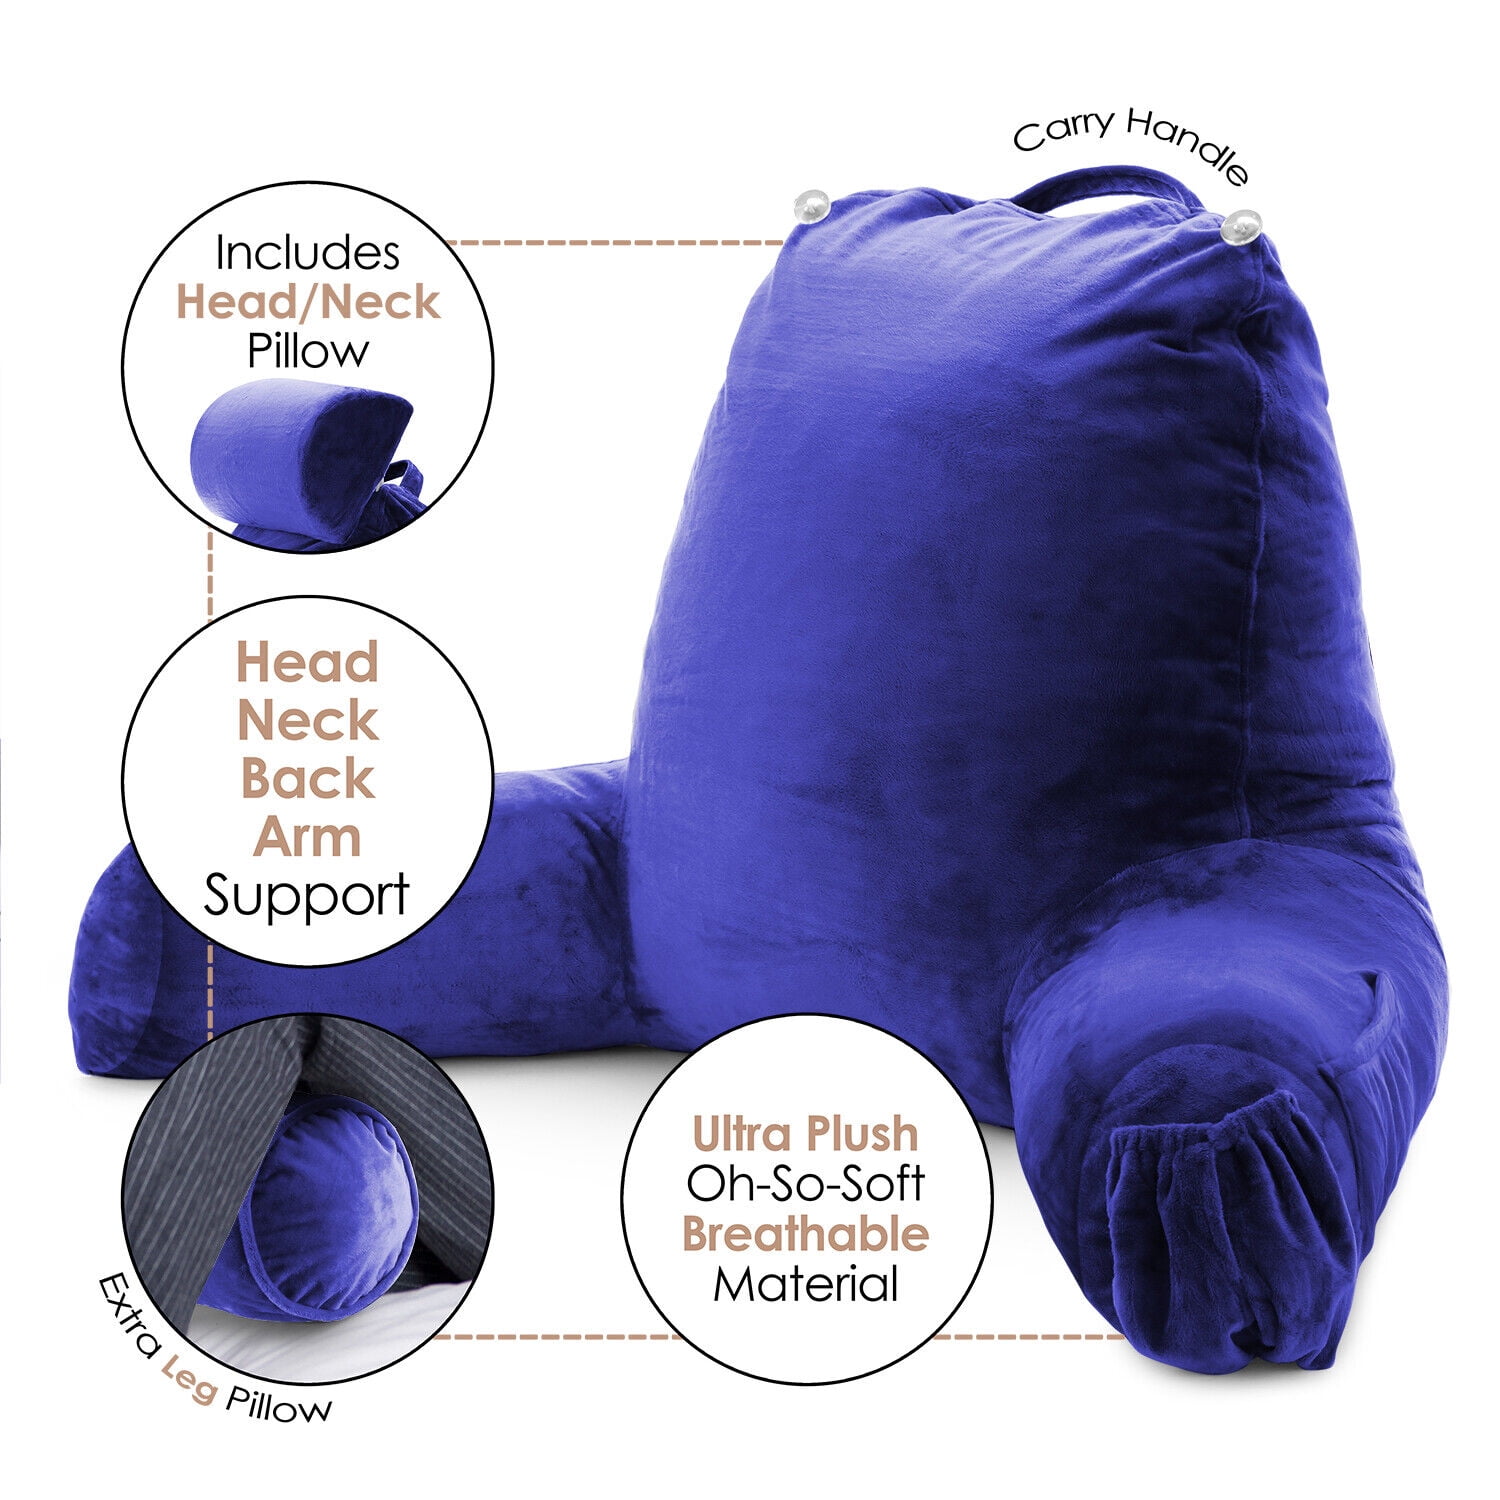  Joyching Backrest Reading Pillows for Sitting in Bed Adults -  Plush Pillow with Shredded Memory Foam Arm Rests Supportive Neck Pillow for  Reading or Watching TV : Home & Kitchen